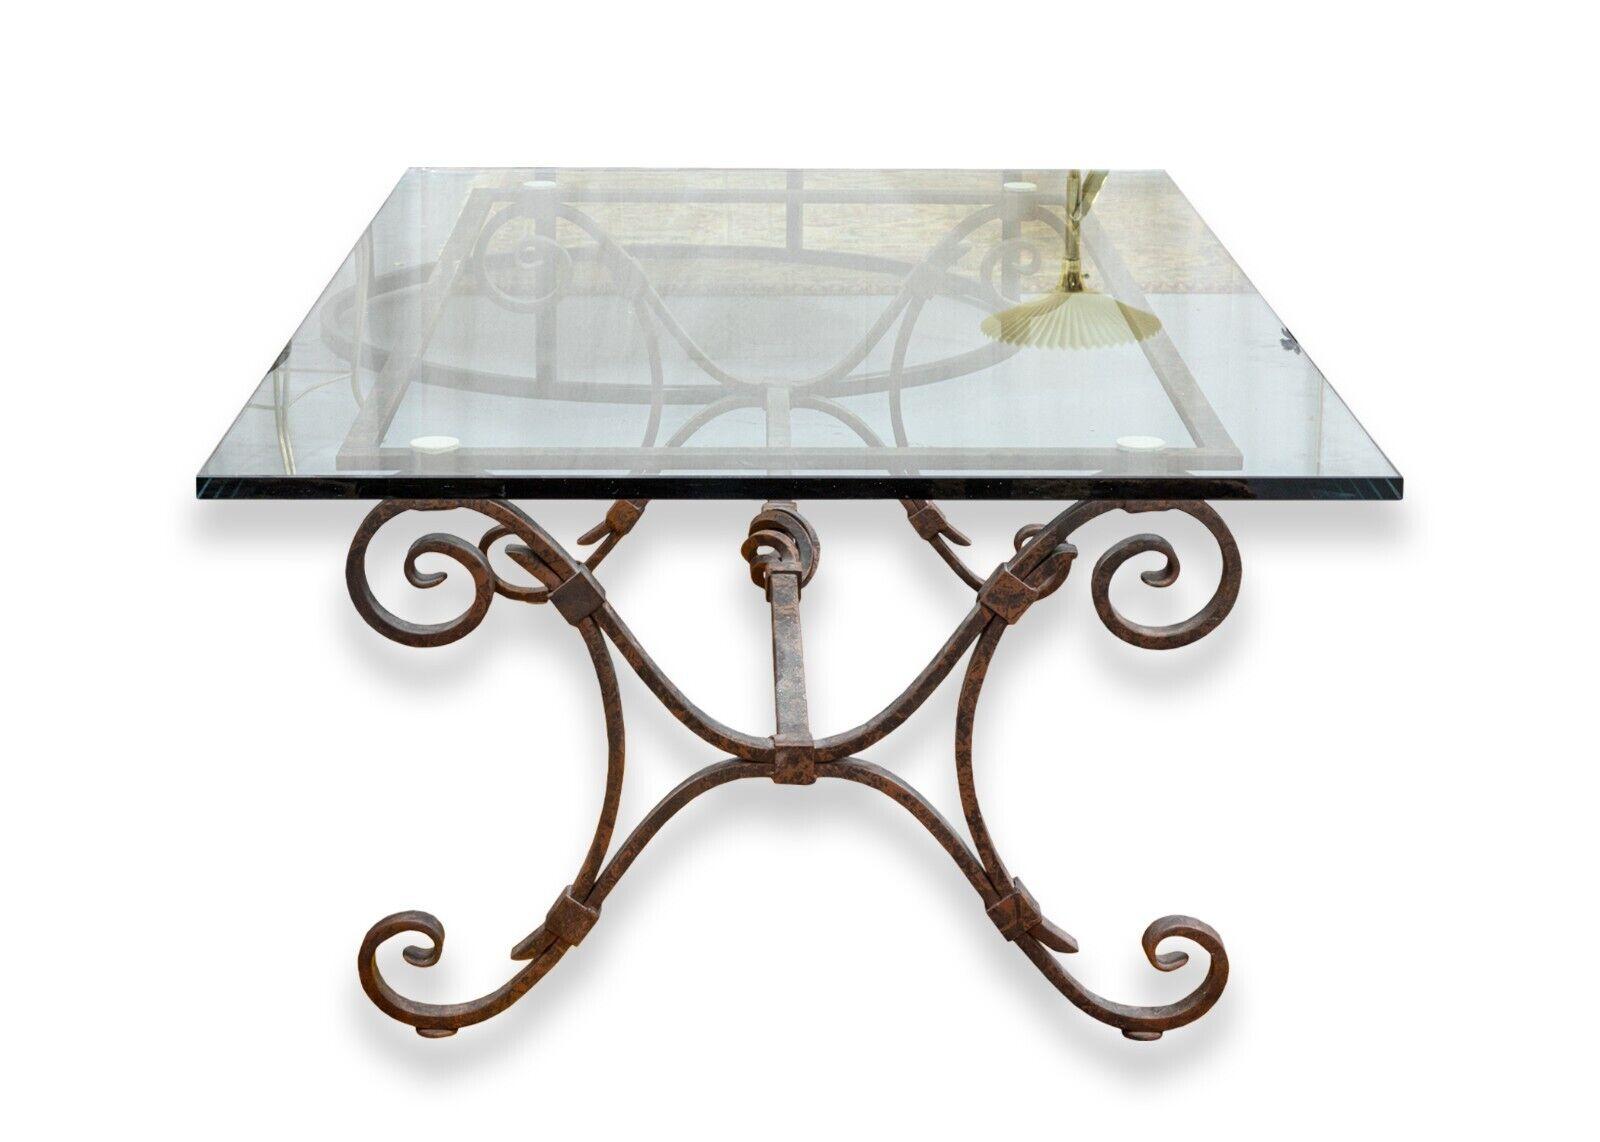 A contemporary modern iron and glass rectangular coffee table. This beautiful coffee table features an ornate iron base design with curving and swirling iron details. The table top is a thick piece of clear glass, resting on soft touch corner pads.